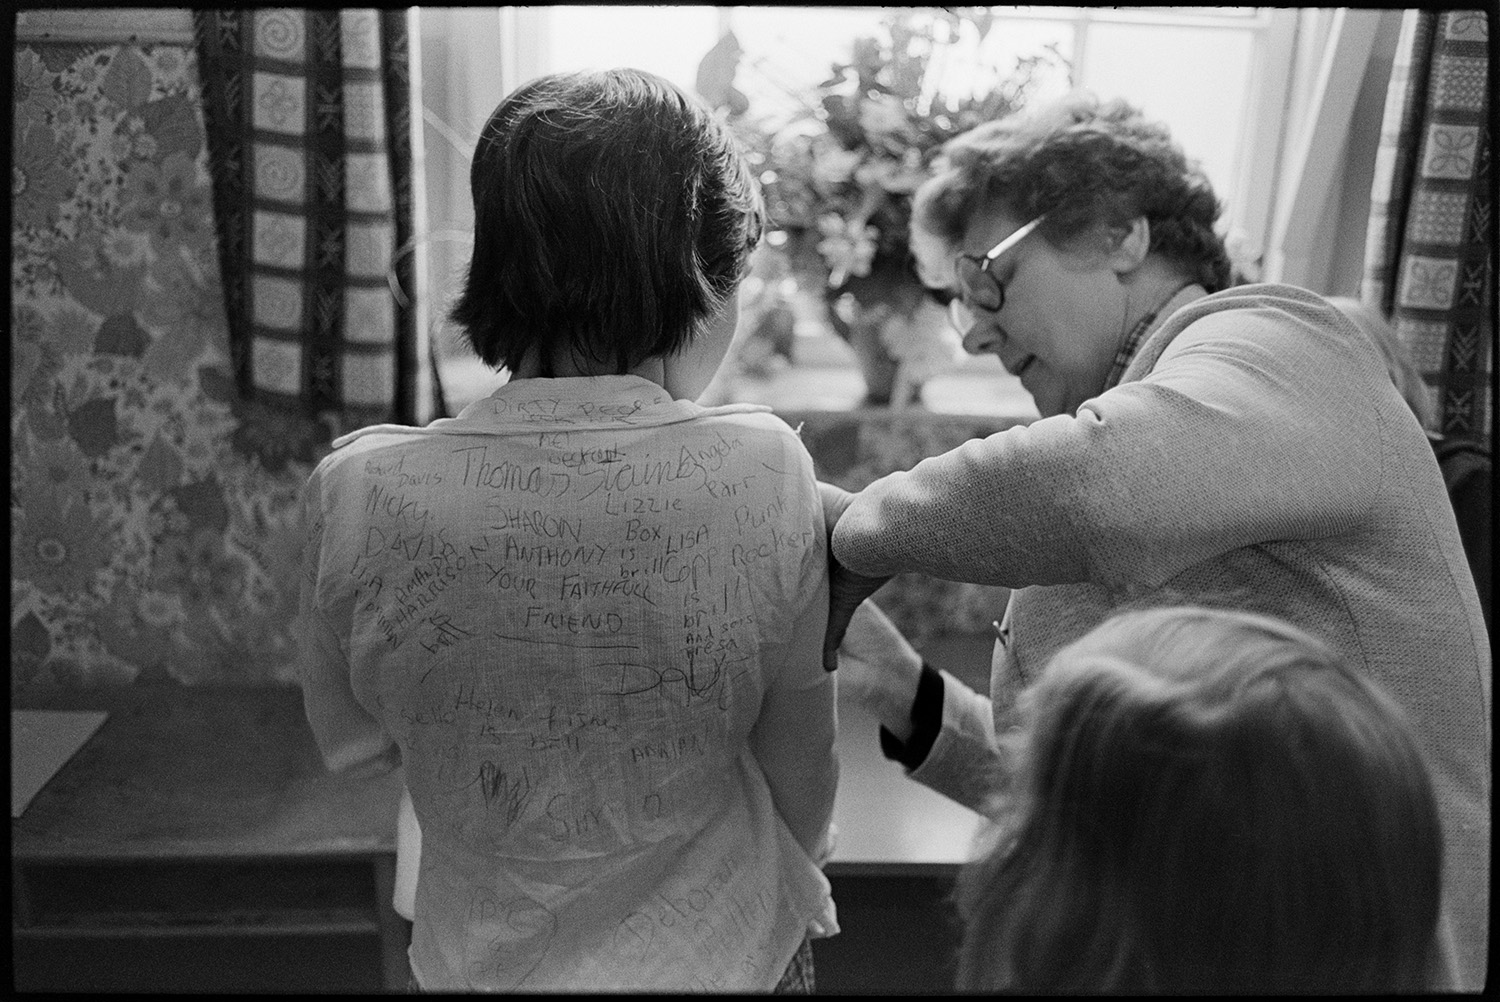 Children arriving at school and getting ready for assembly. 
[A teacher signing a child's shirt at Blue Coats School, Torrington. Other signatures and messages can be seen on the back of the child's shirt.]